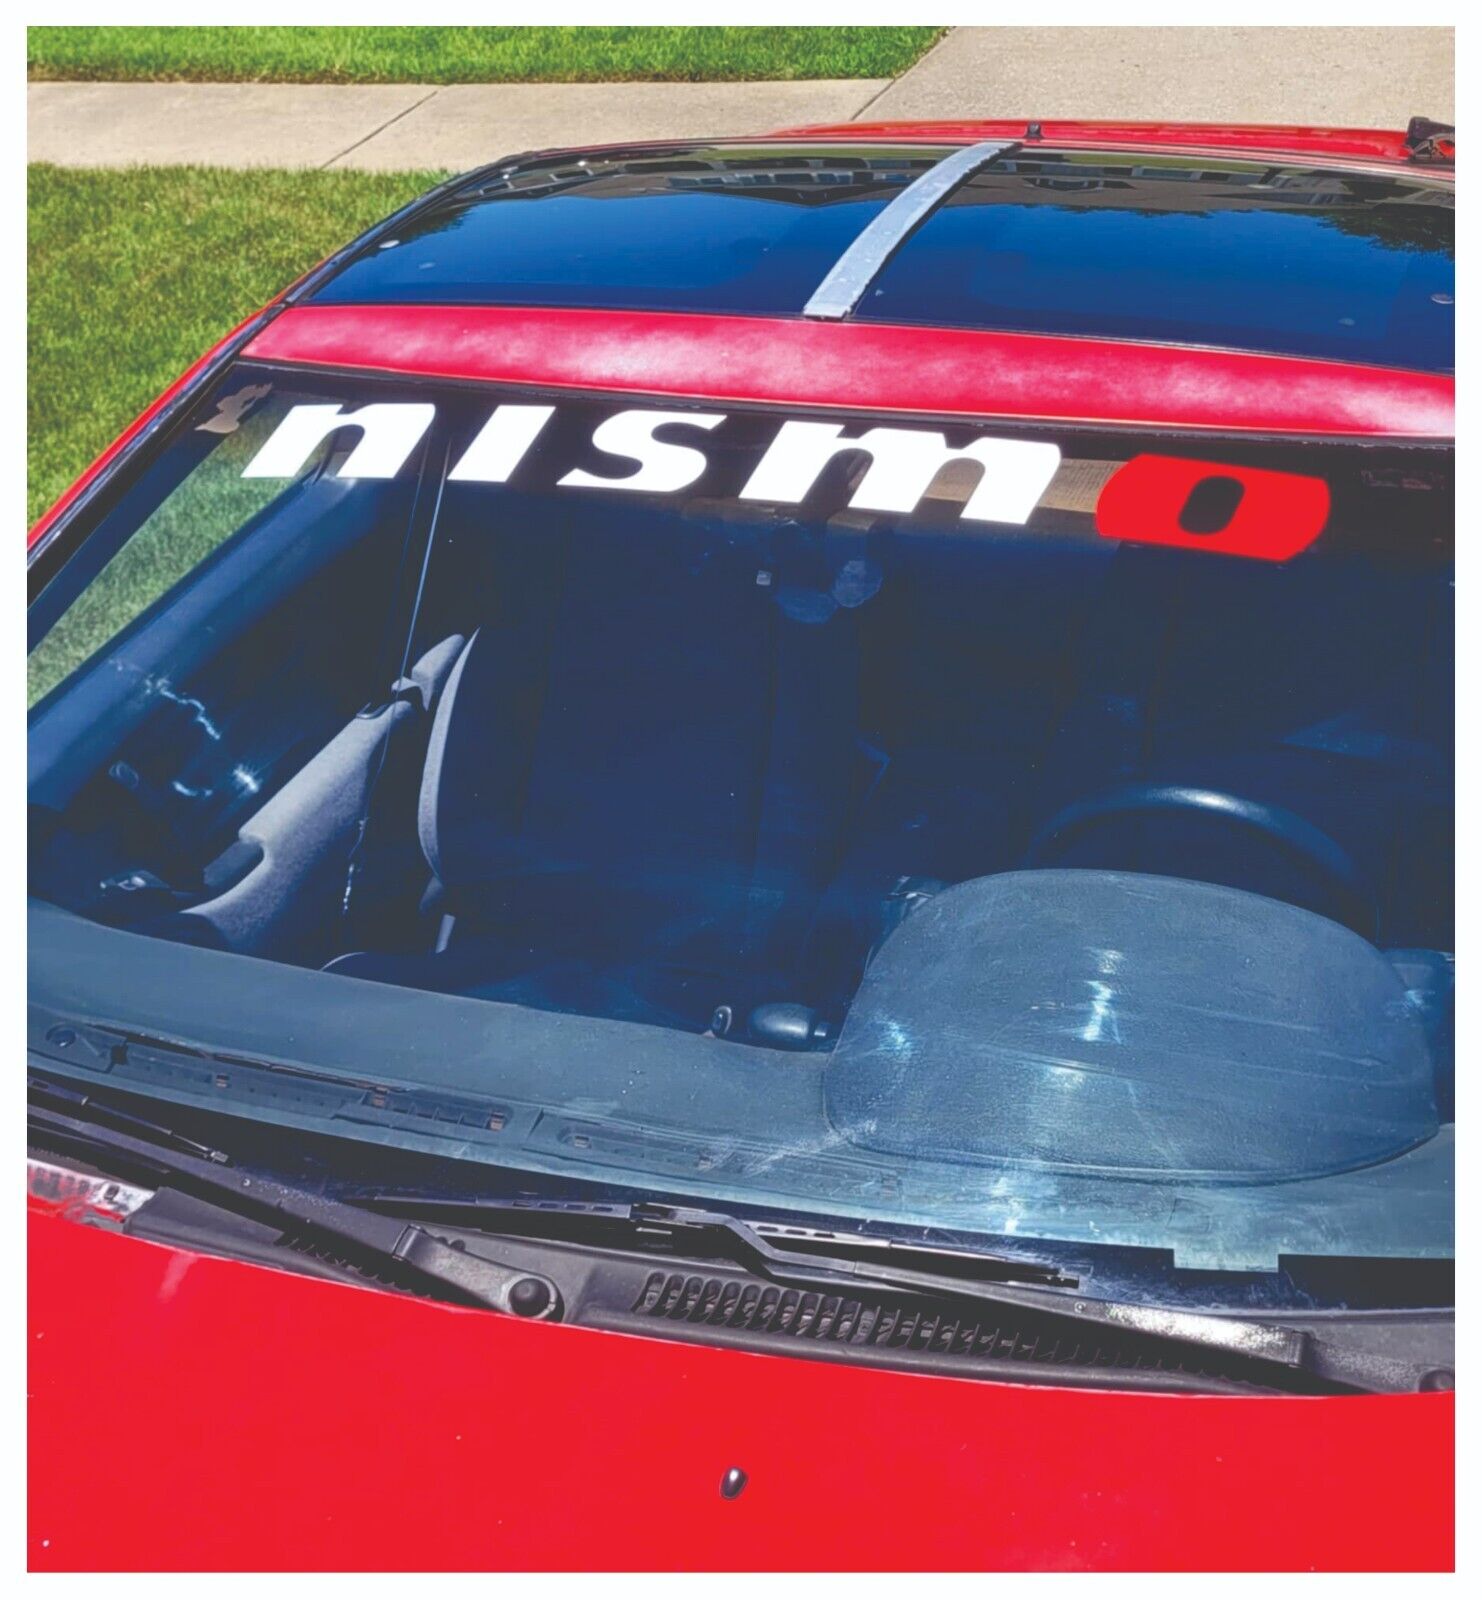 Windshield Decal  For Nissan / Nismo fits 300 350 370 Z / NISMO w red O